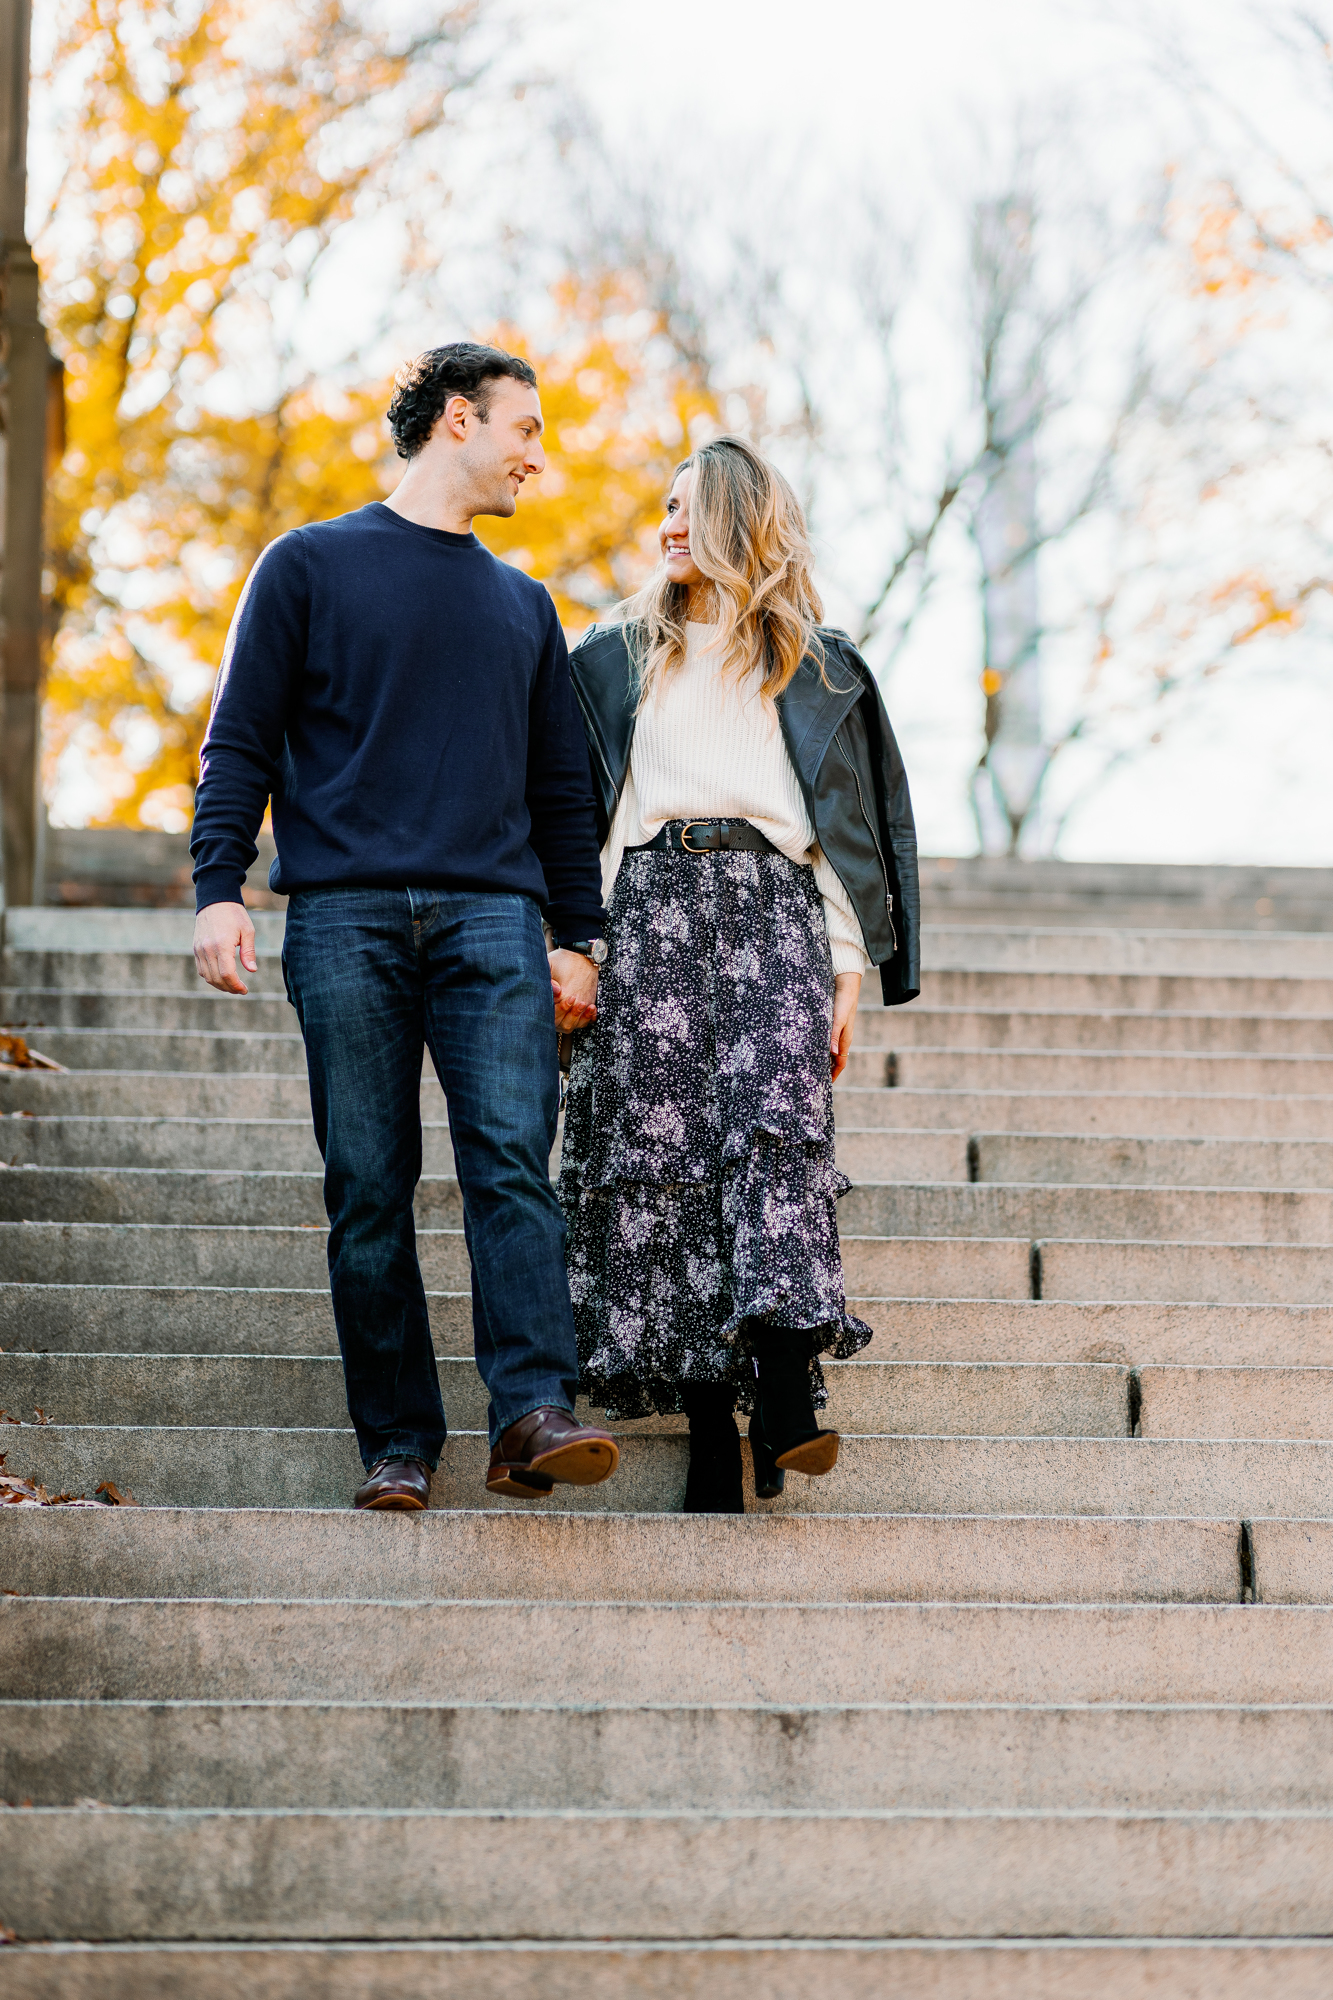 Fall leaves in Central Park for engagement session